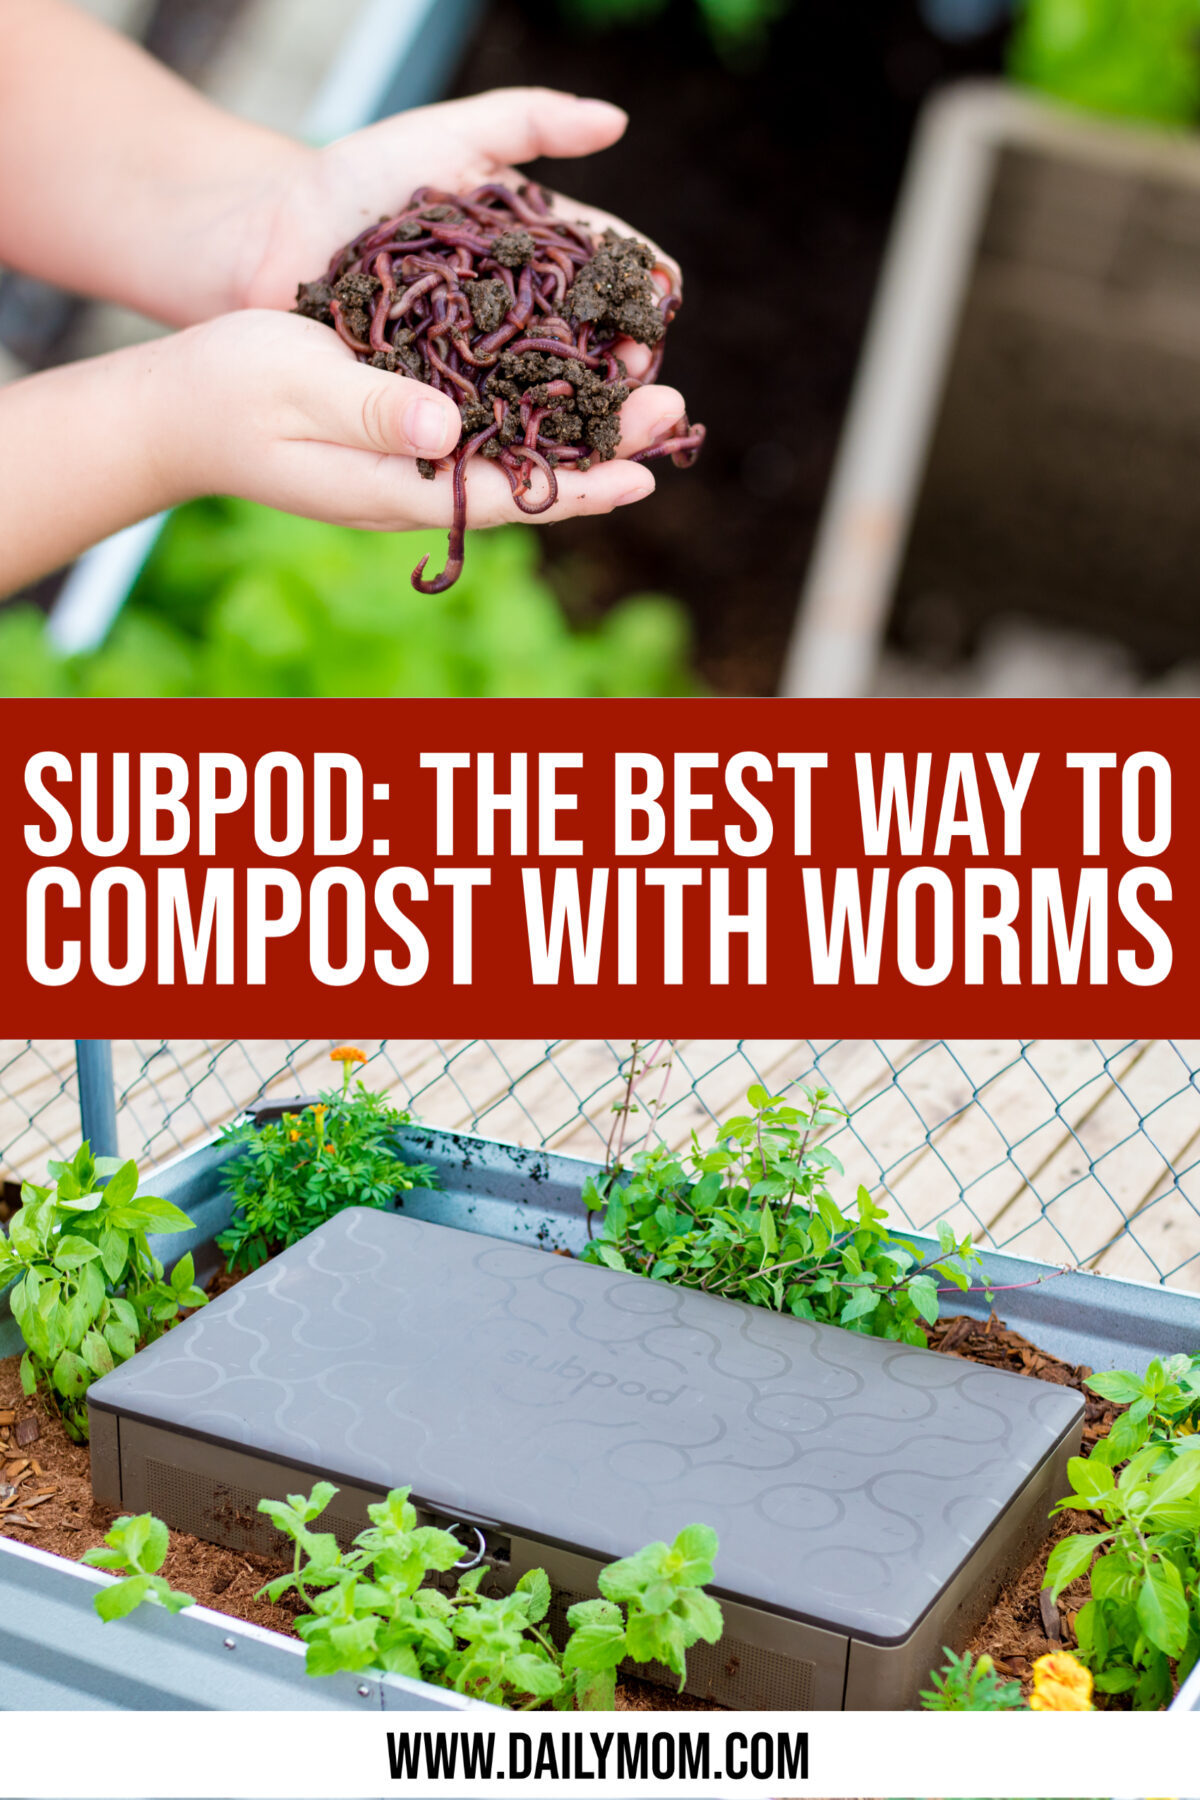 Subpod: Composting With Worms And How It Works